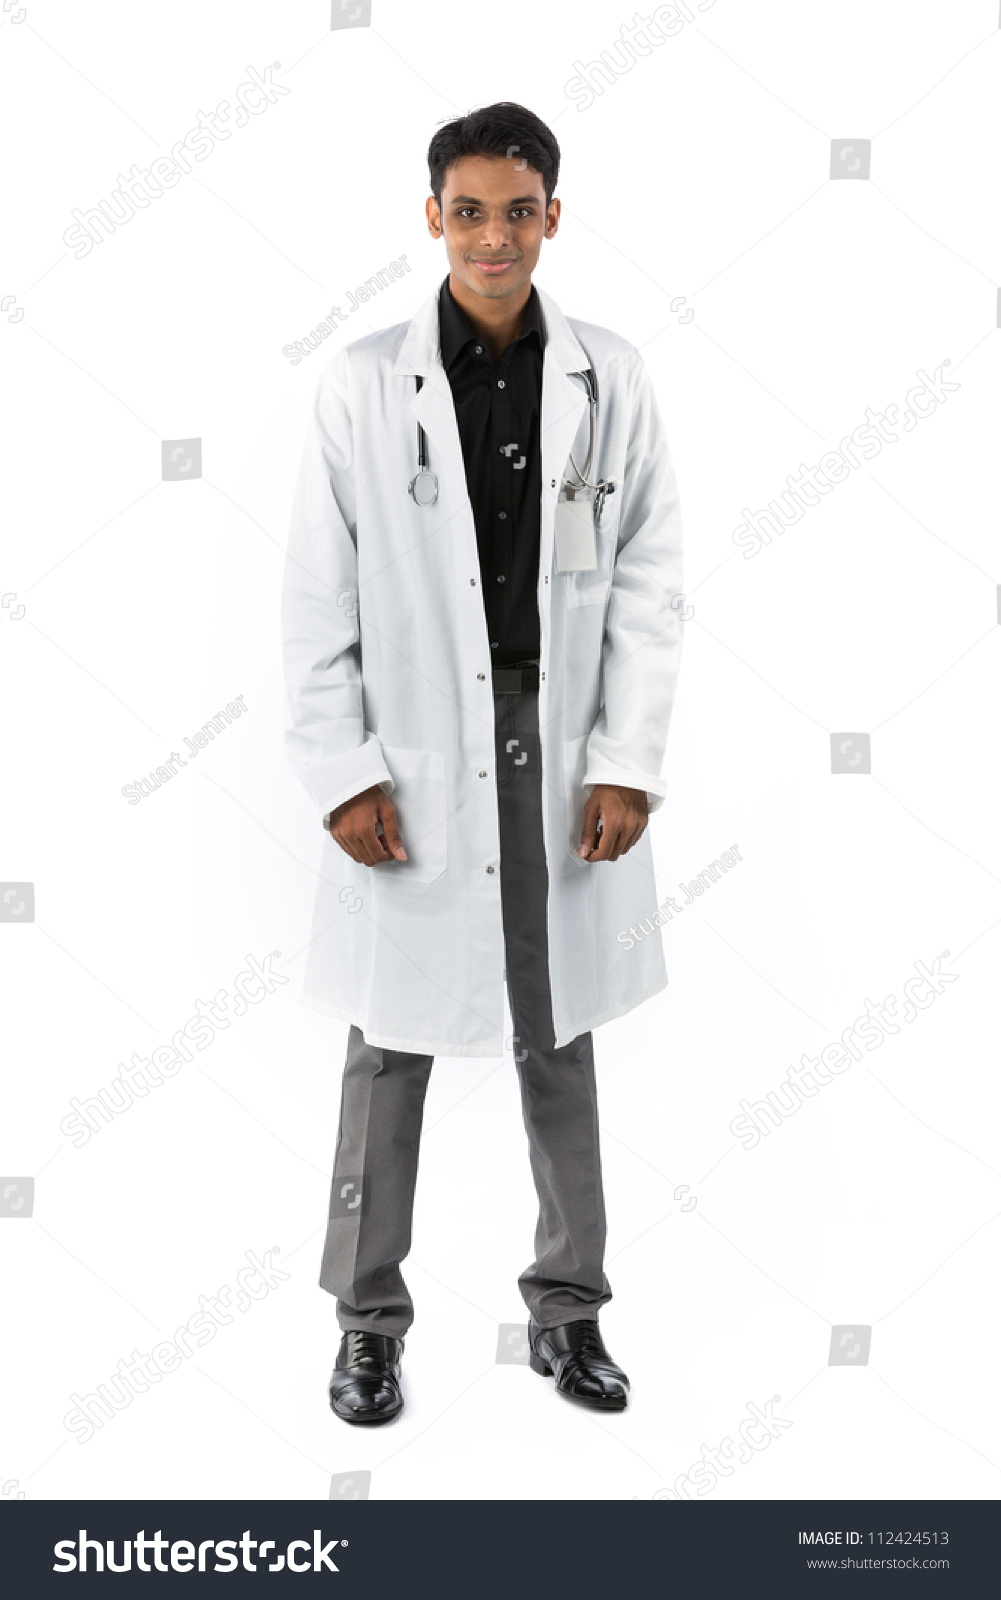 Young Indian Doctor Wearing Shirt White Stock Photo 112424513